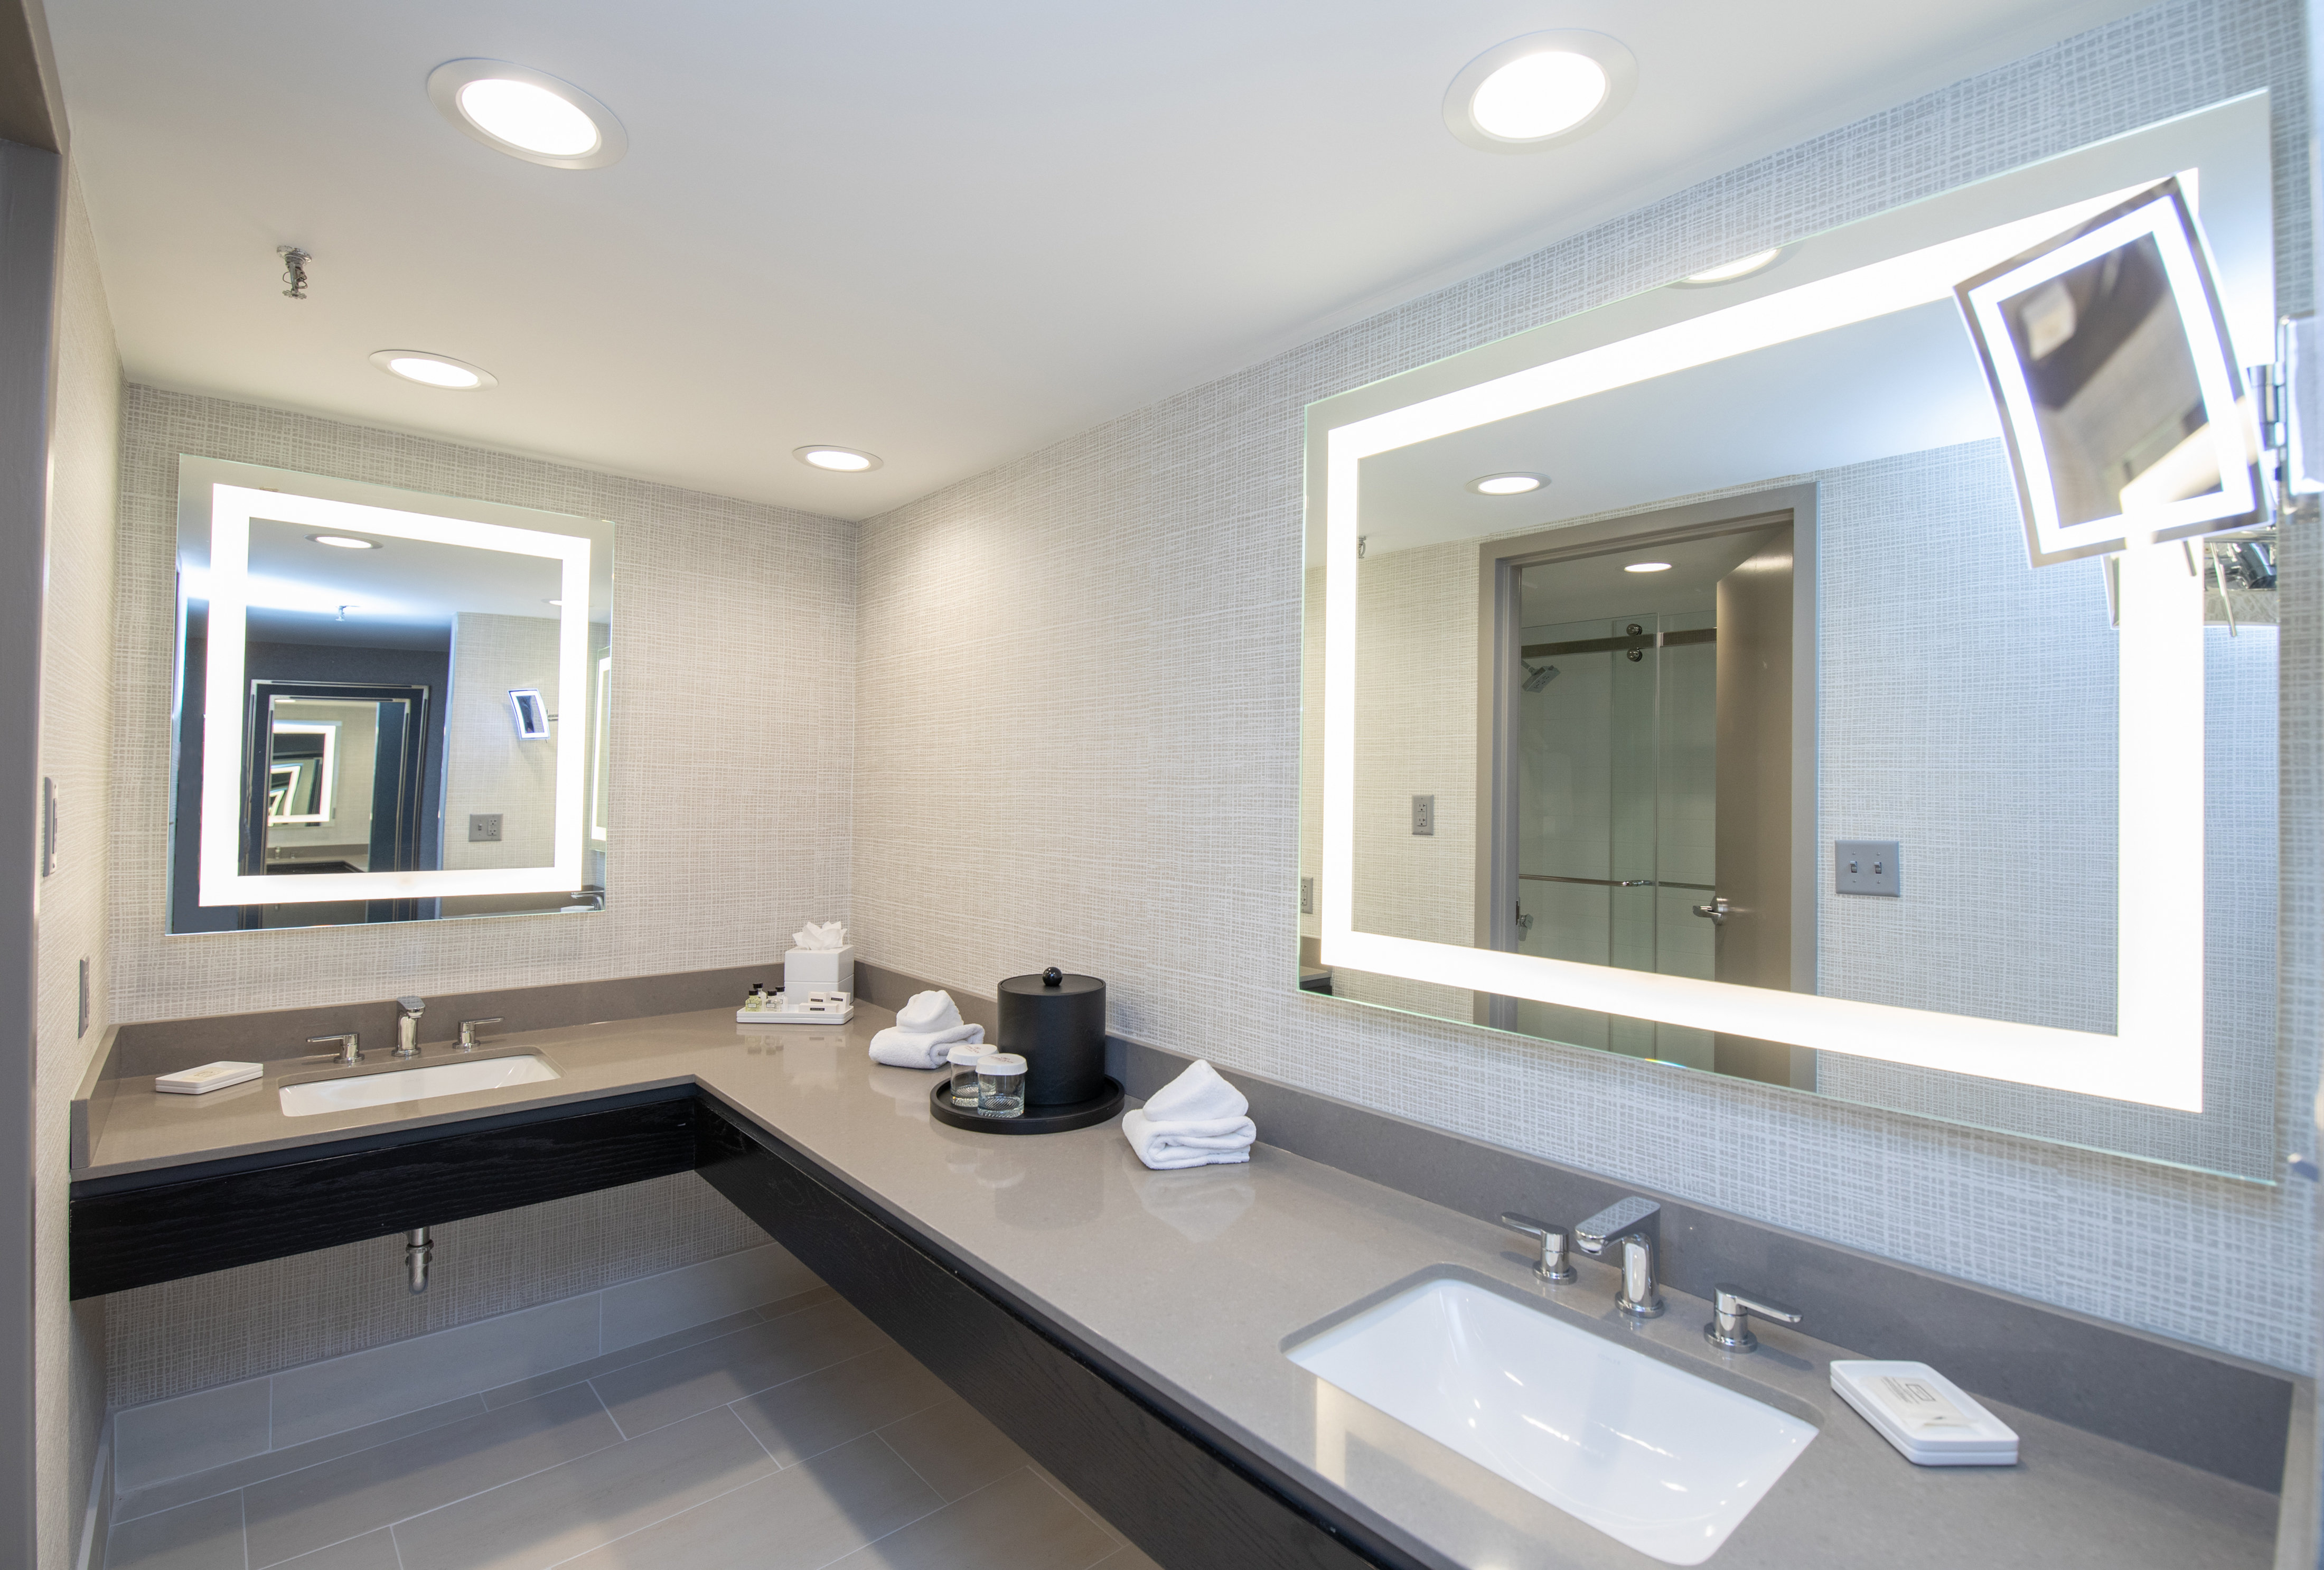 Our well-lit guest bathroom will keep you relaxed and energized.